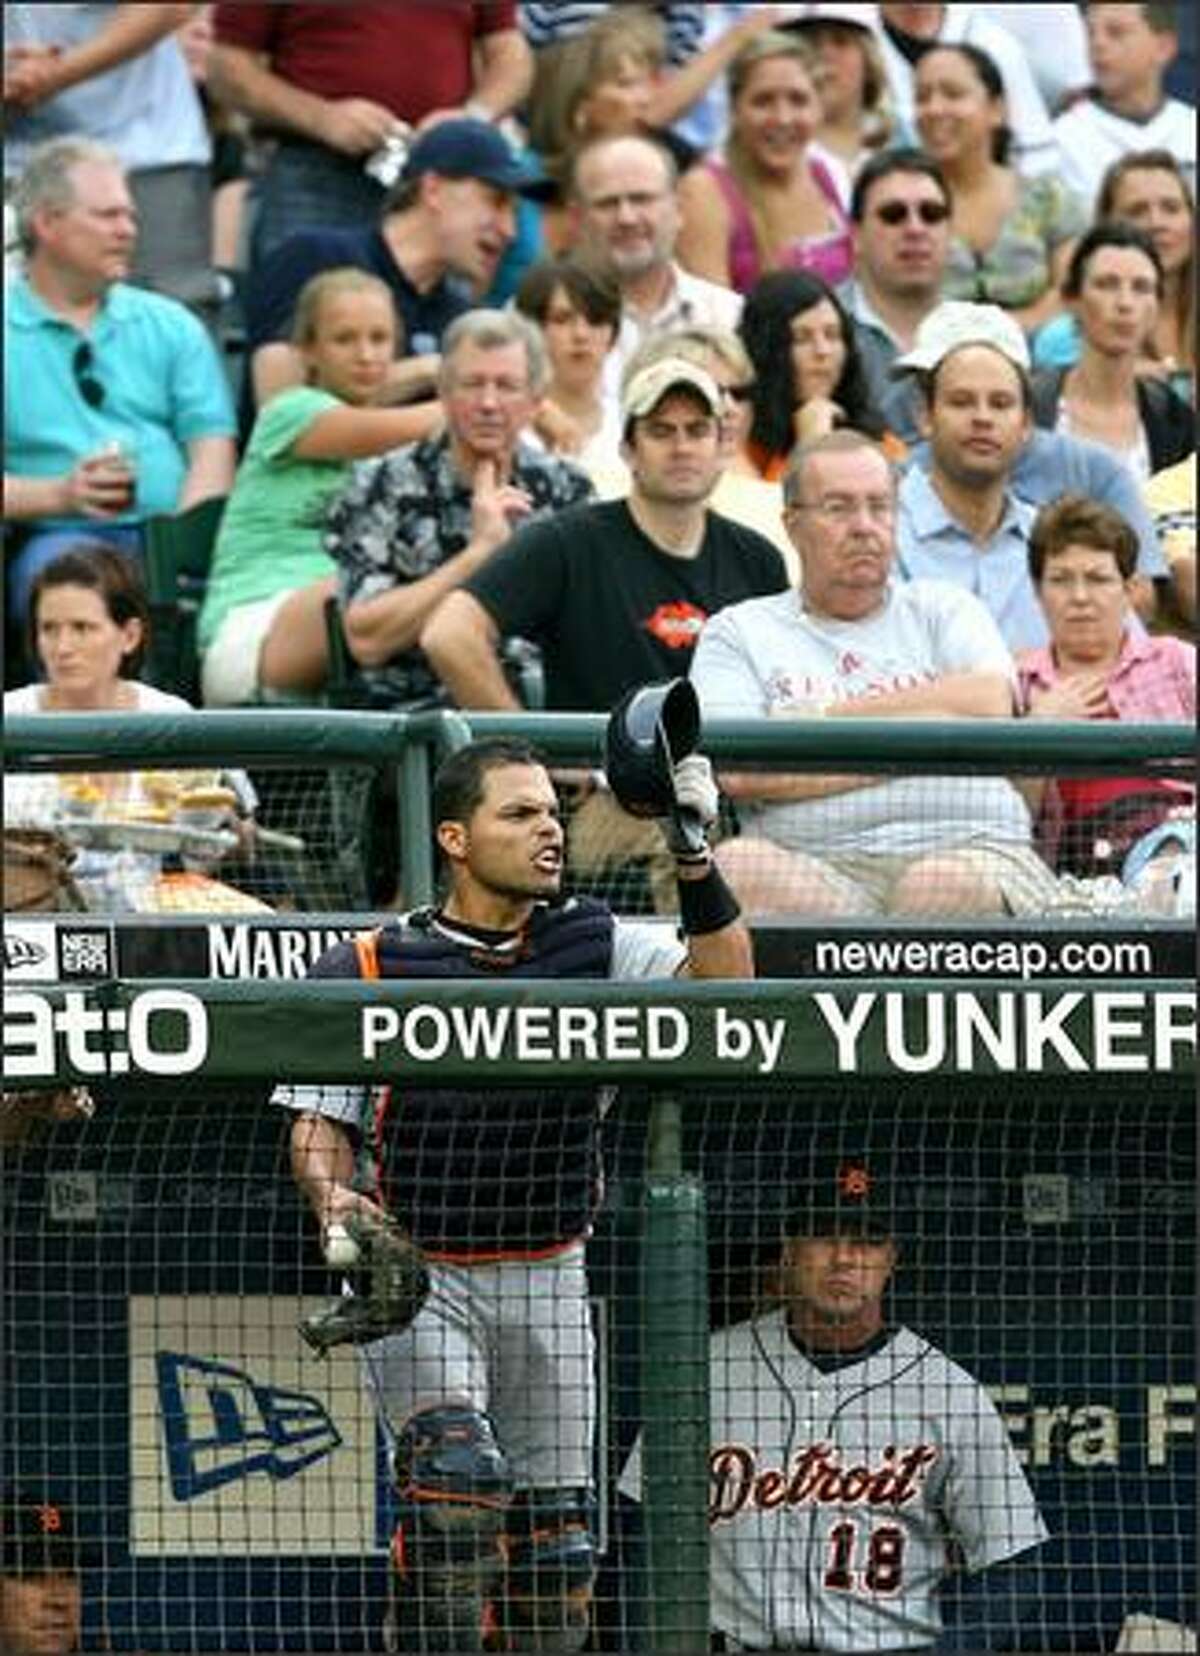 Ivan Rodriguez continues to yell obscenities from the dugout after being ejected from the game by plate umpire Mike Winters in the fourth inning.